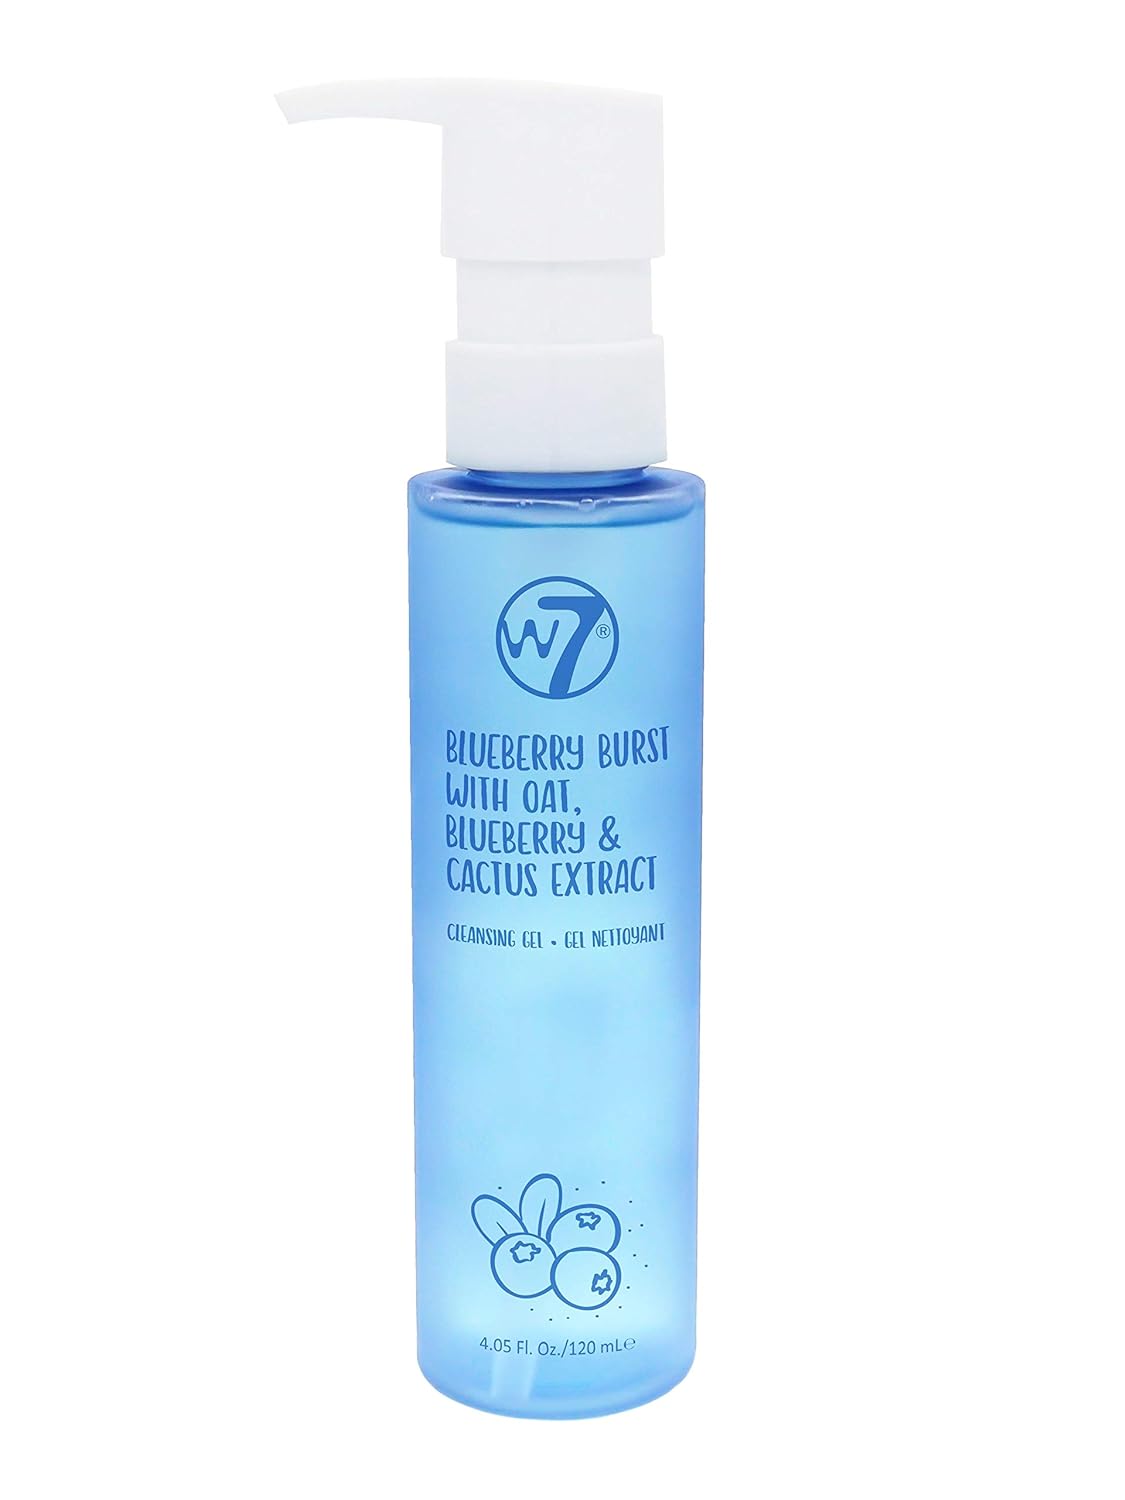 W7 Blueberry Burst Cleansing Gel - Blueberry, Cactus and Oat Extract - Remove Makeup & Cleanse Skin